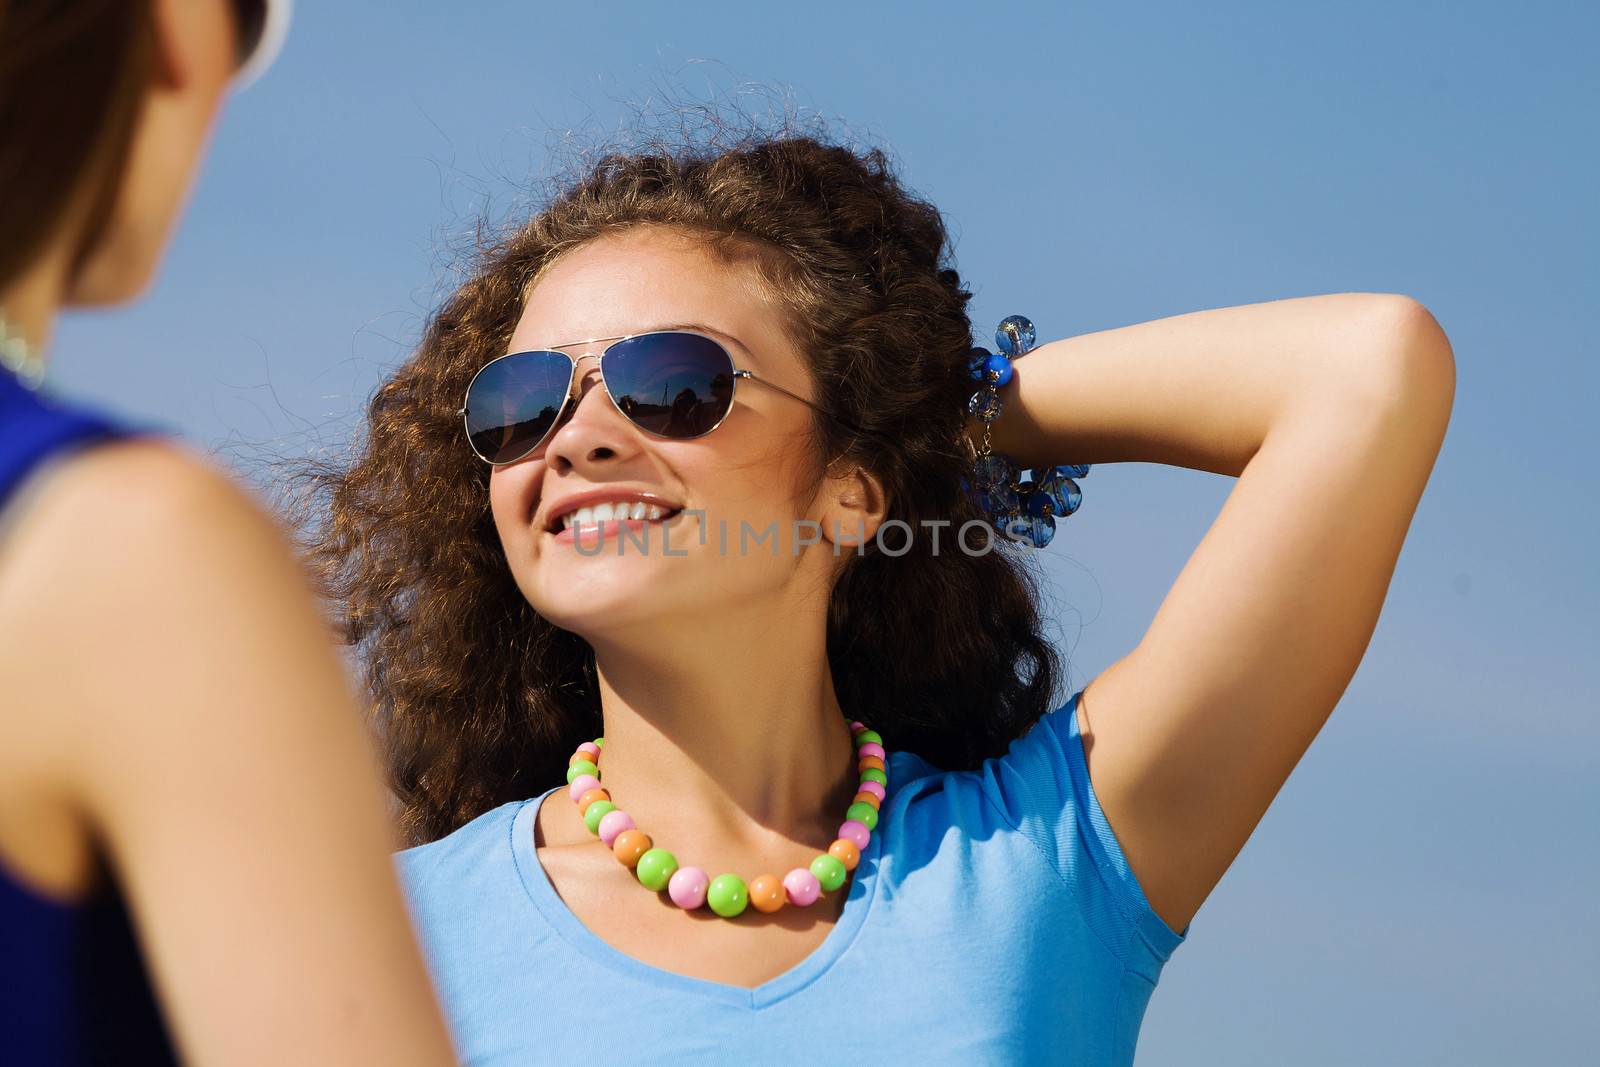 Attractive young women having fun outdoors. Summer vacation